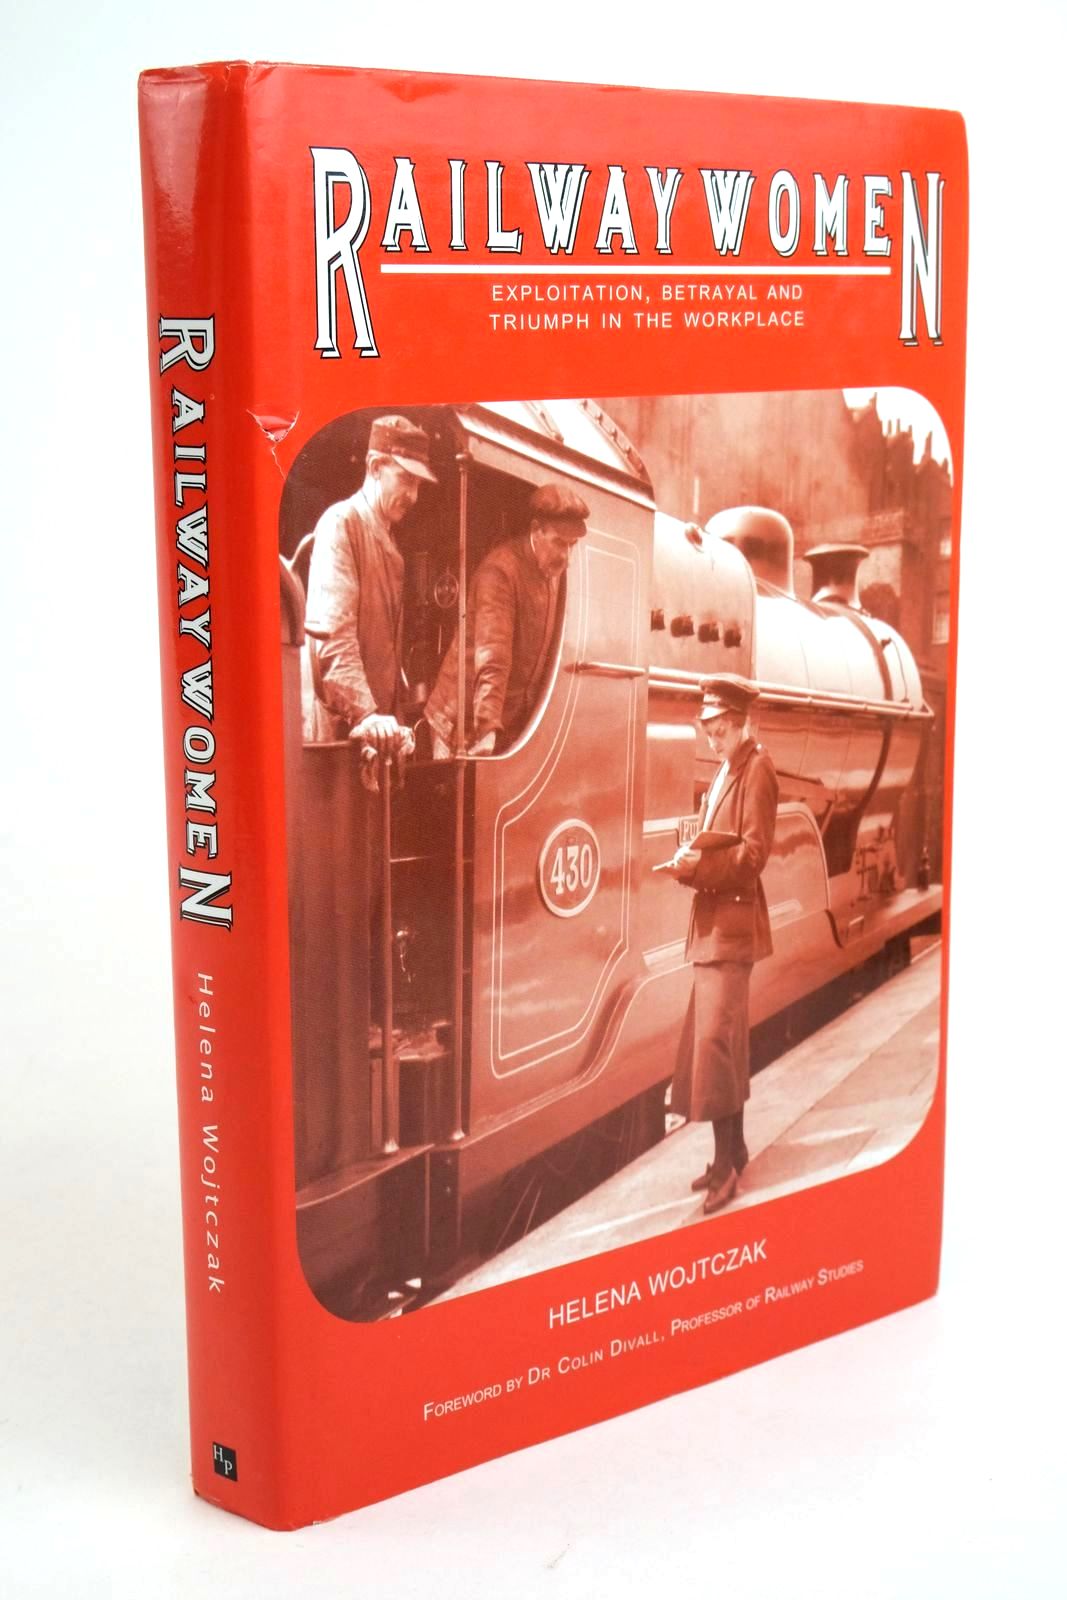 Photo of RAILWAYWOMEN written by Wojtczak, Helena published by The Hastings Press (STOCK CODE: 1322302)  for sale by Stella & Rose's Books